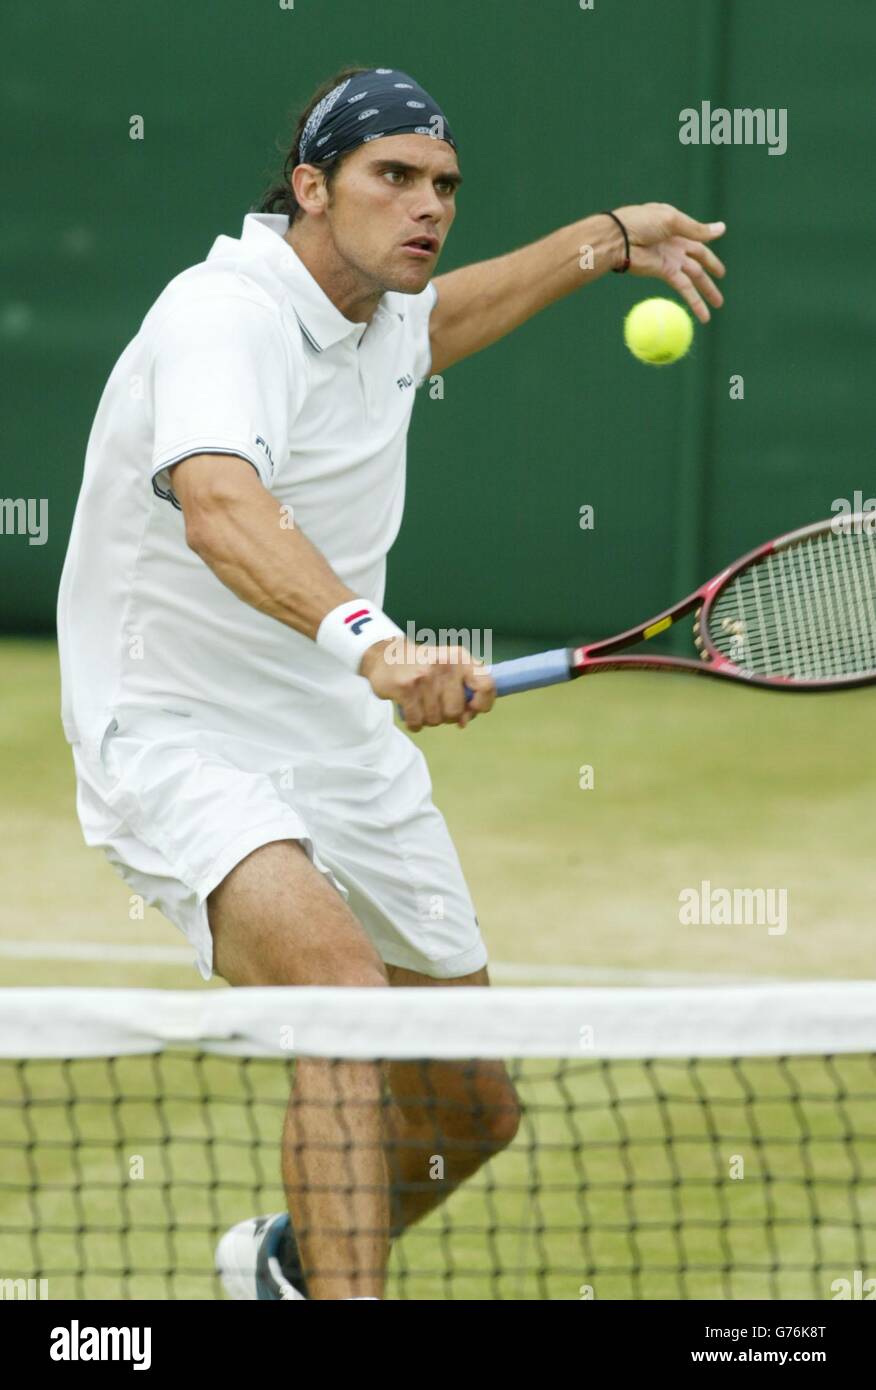 The Australian tennis player Mark Philippoussis in action against Nicolas Kiefer of Germany on Two at Wimbledon during the tennis championships Stock Photo - Alamy